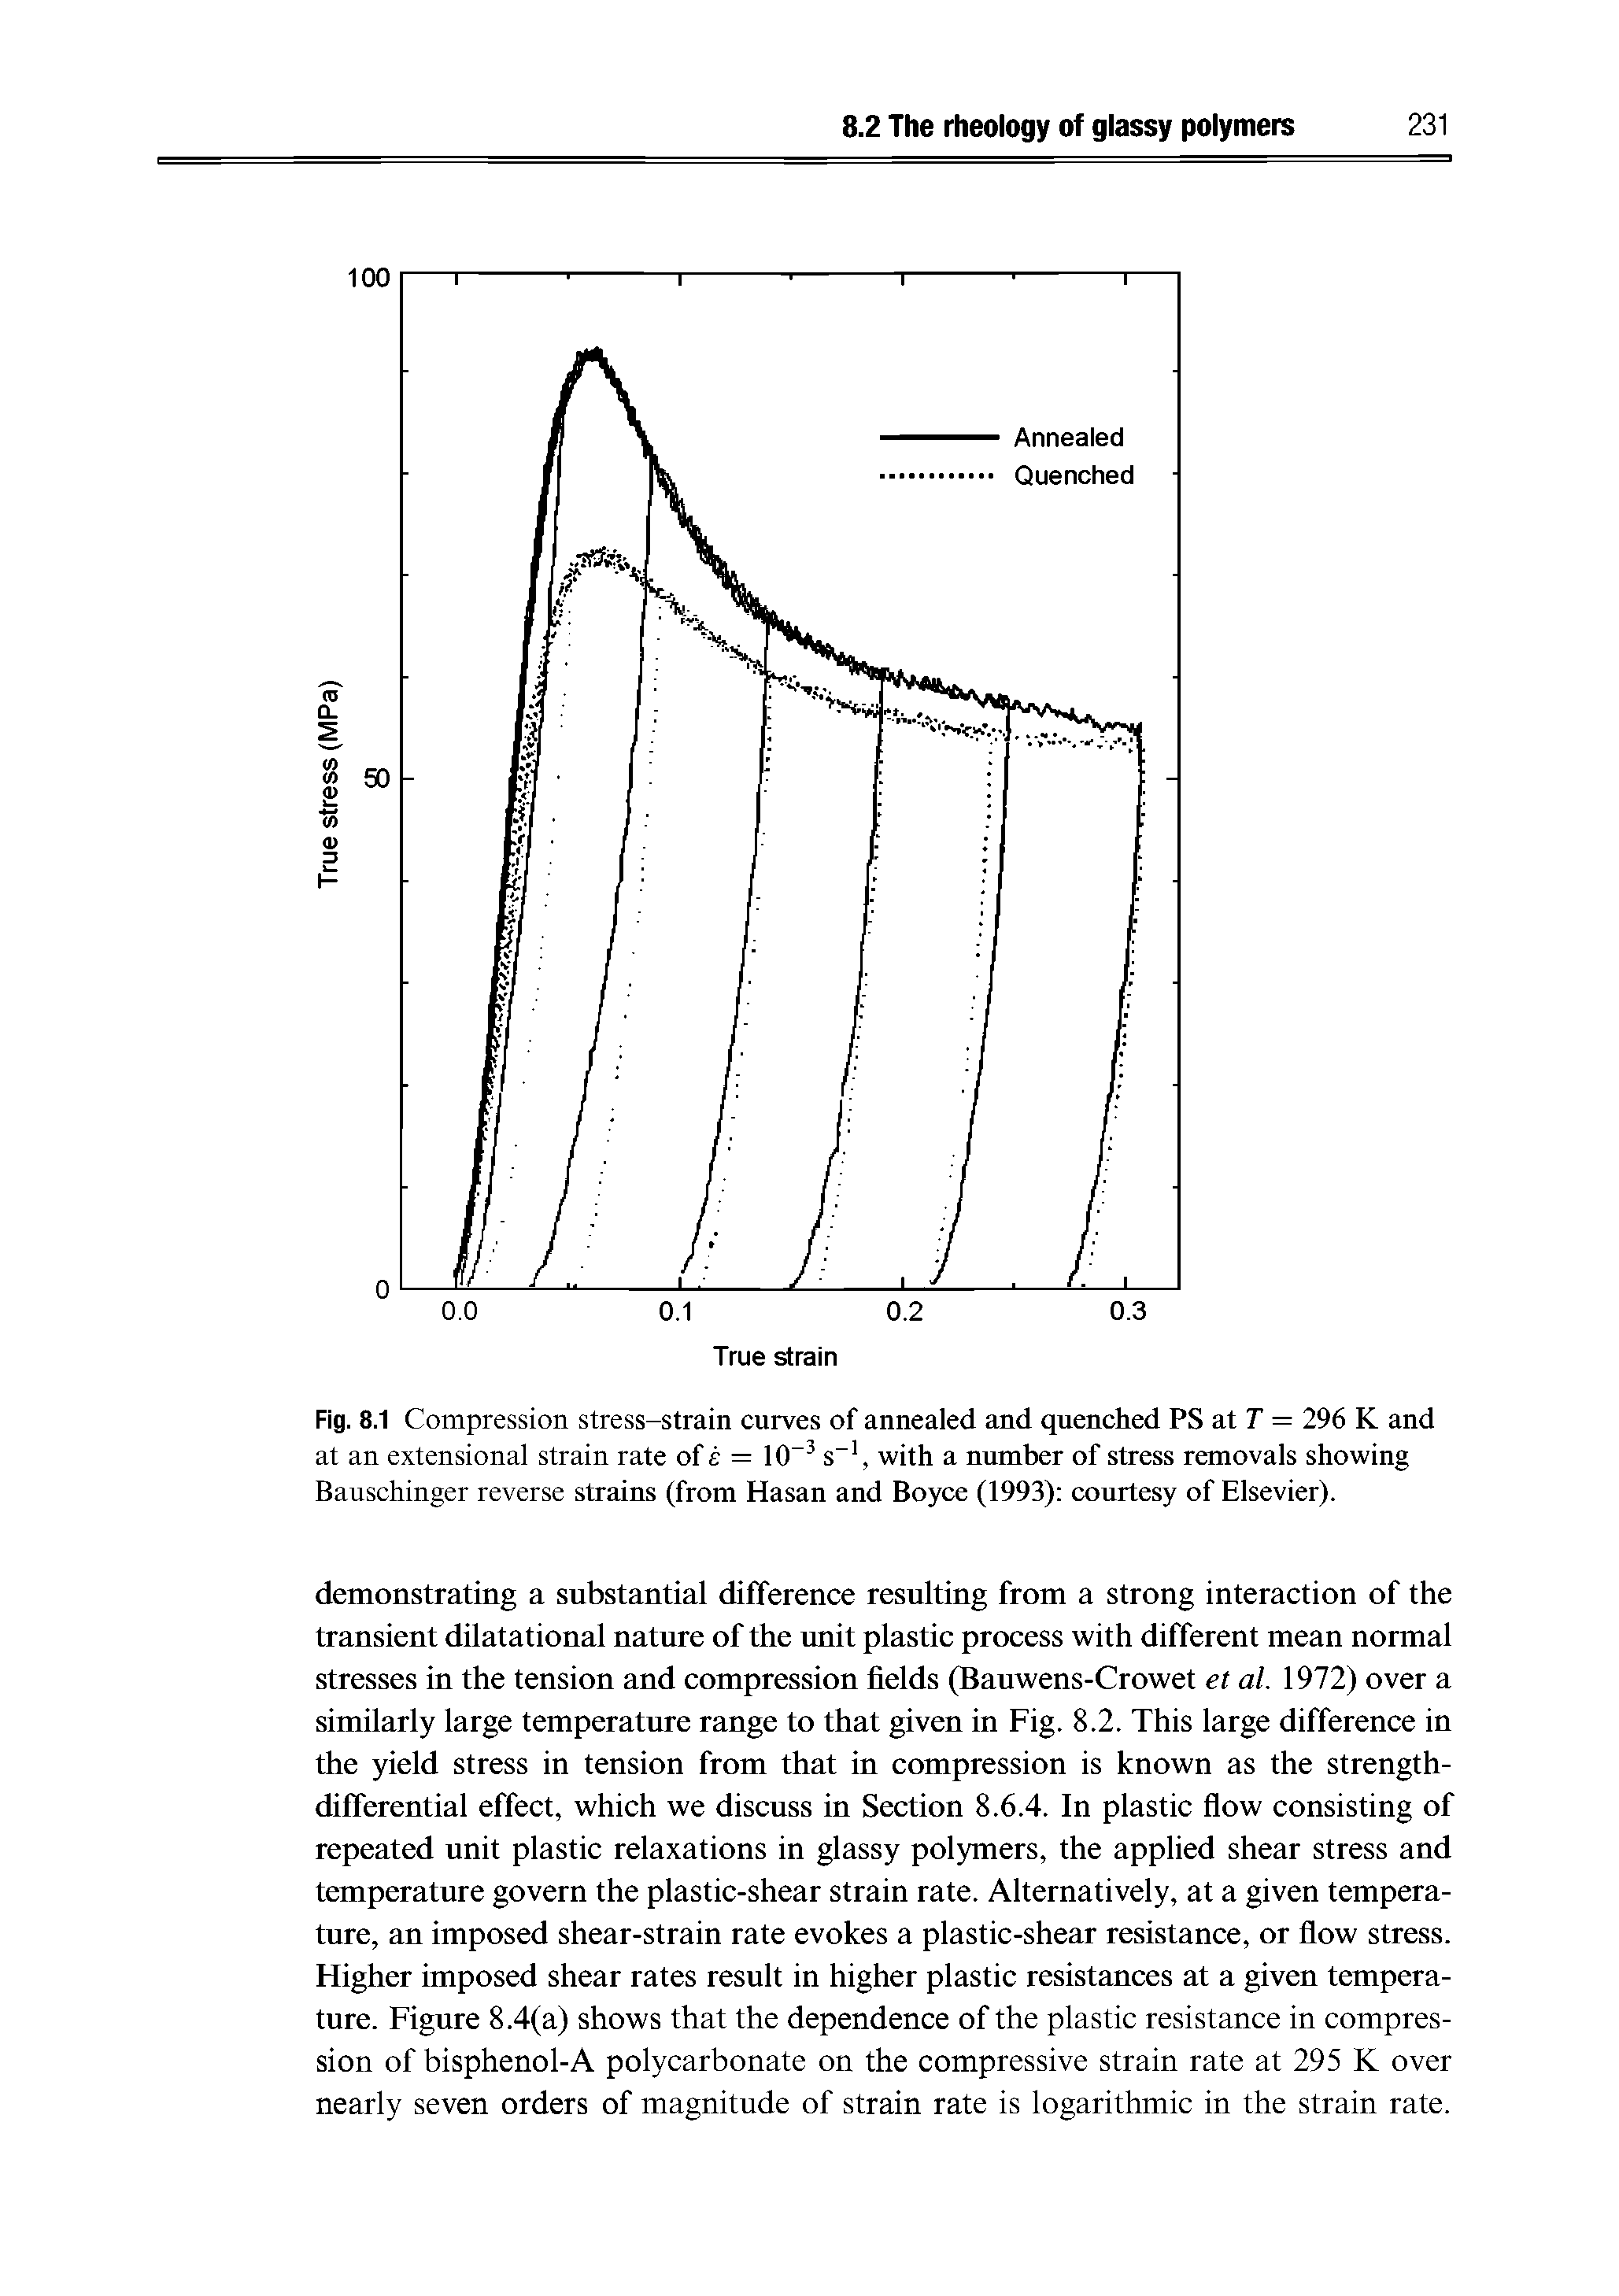 Fig. 8.1 Compression stress-strain curves of annealed and quenched PS at T = 296 K and at an extensional strain rate of e = 10 s , with a number of stress removals showing Bauschinger reverse strains (from Hasan and Boyce (1993) courtesy of Elsevier).